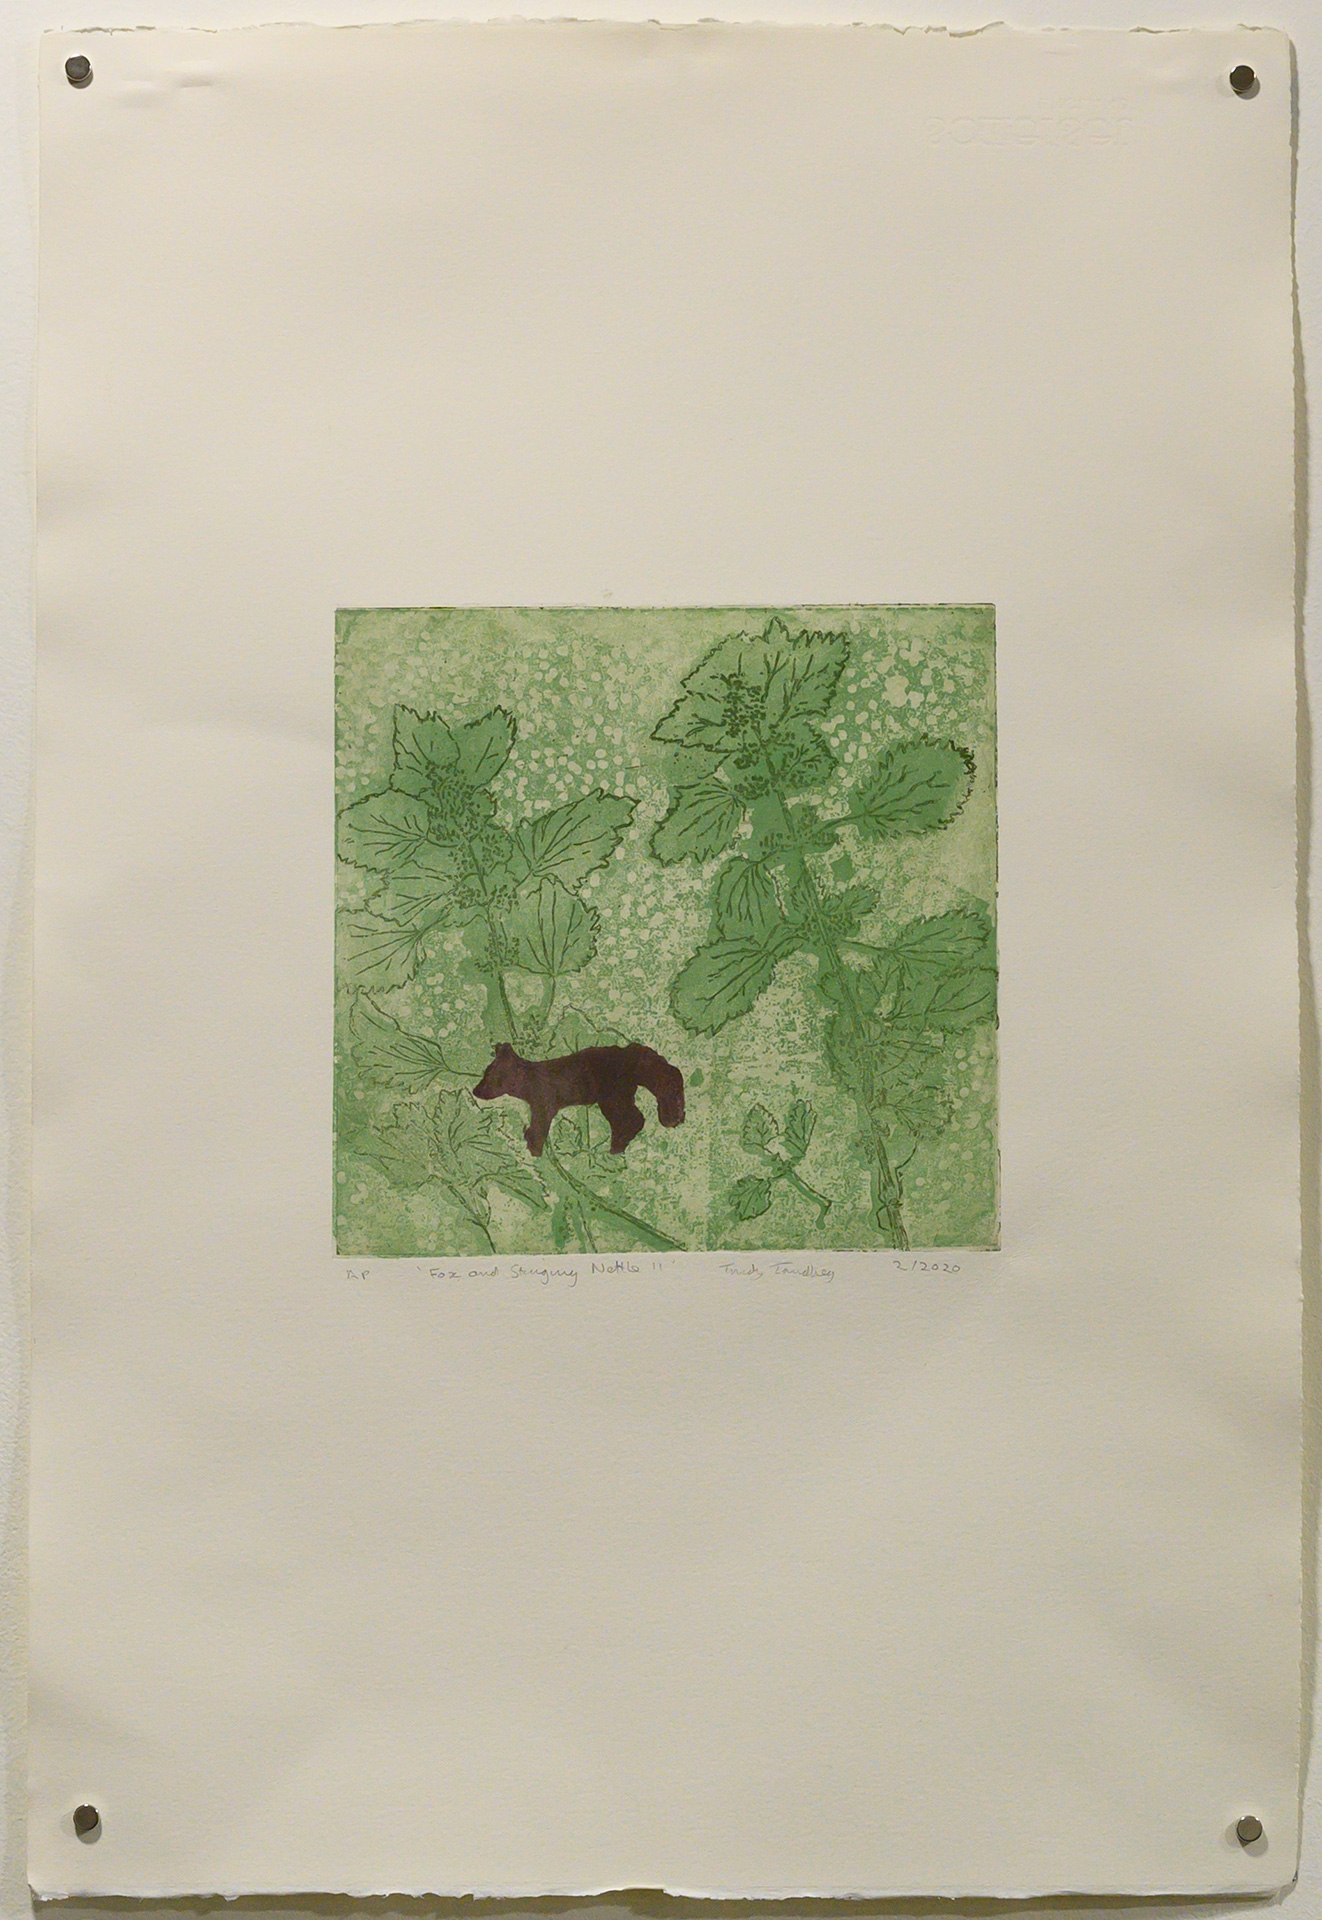 Unframed artwork by Trudy Tandberg of small fox silhouette on green background with detailed stinging nettle